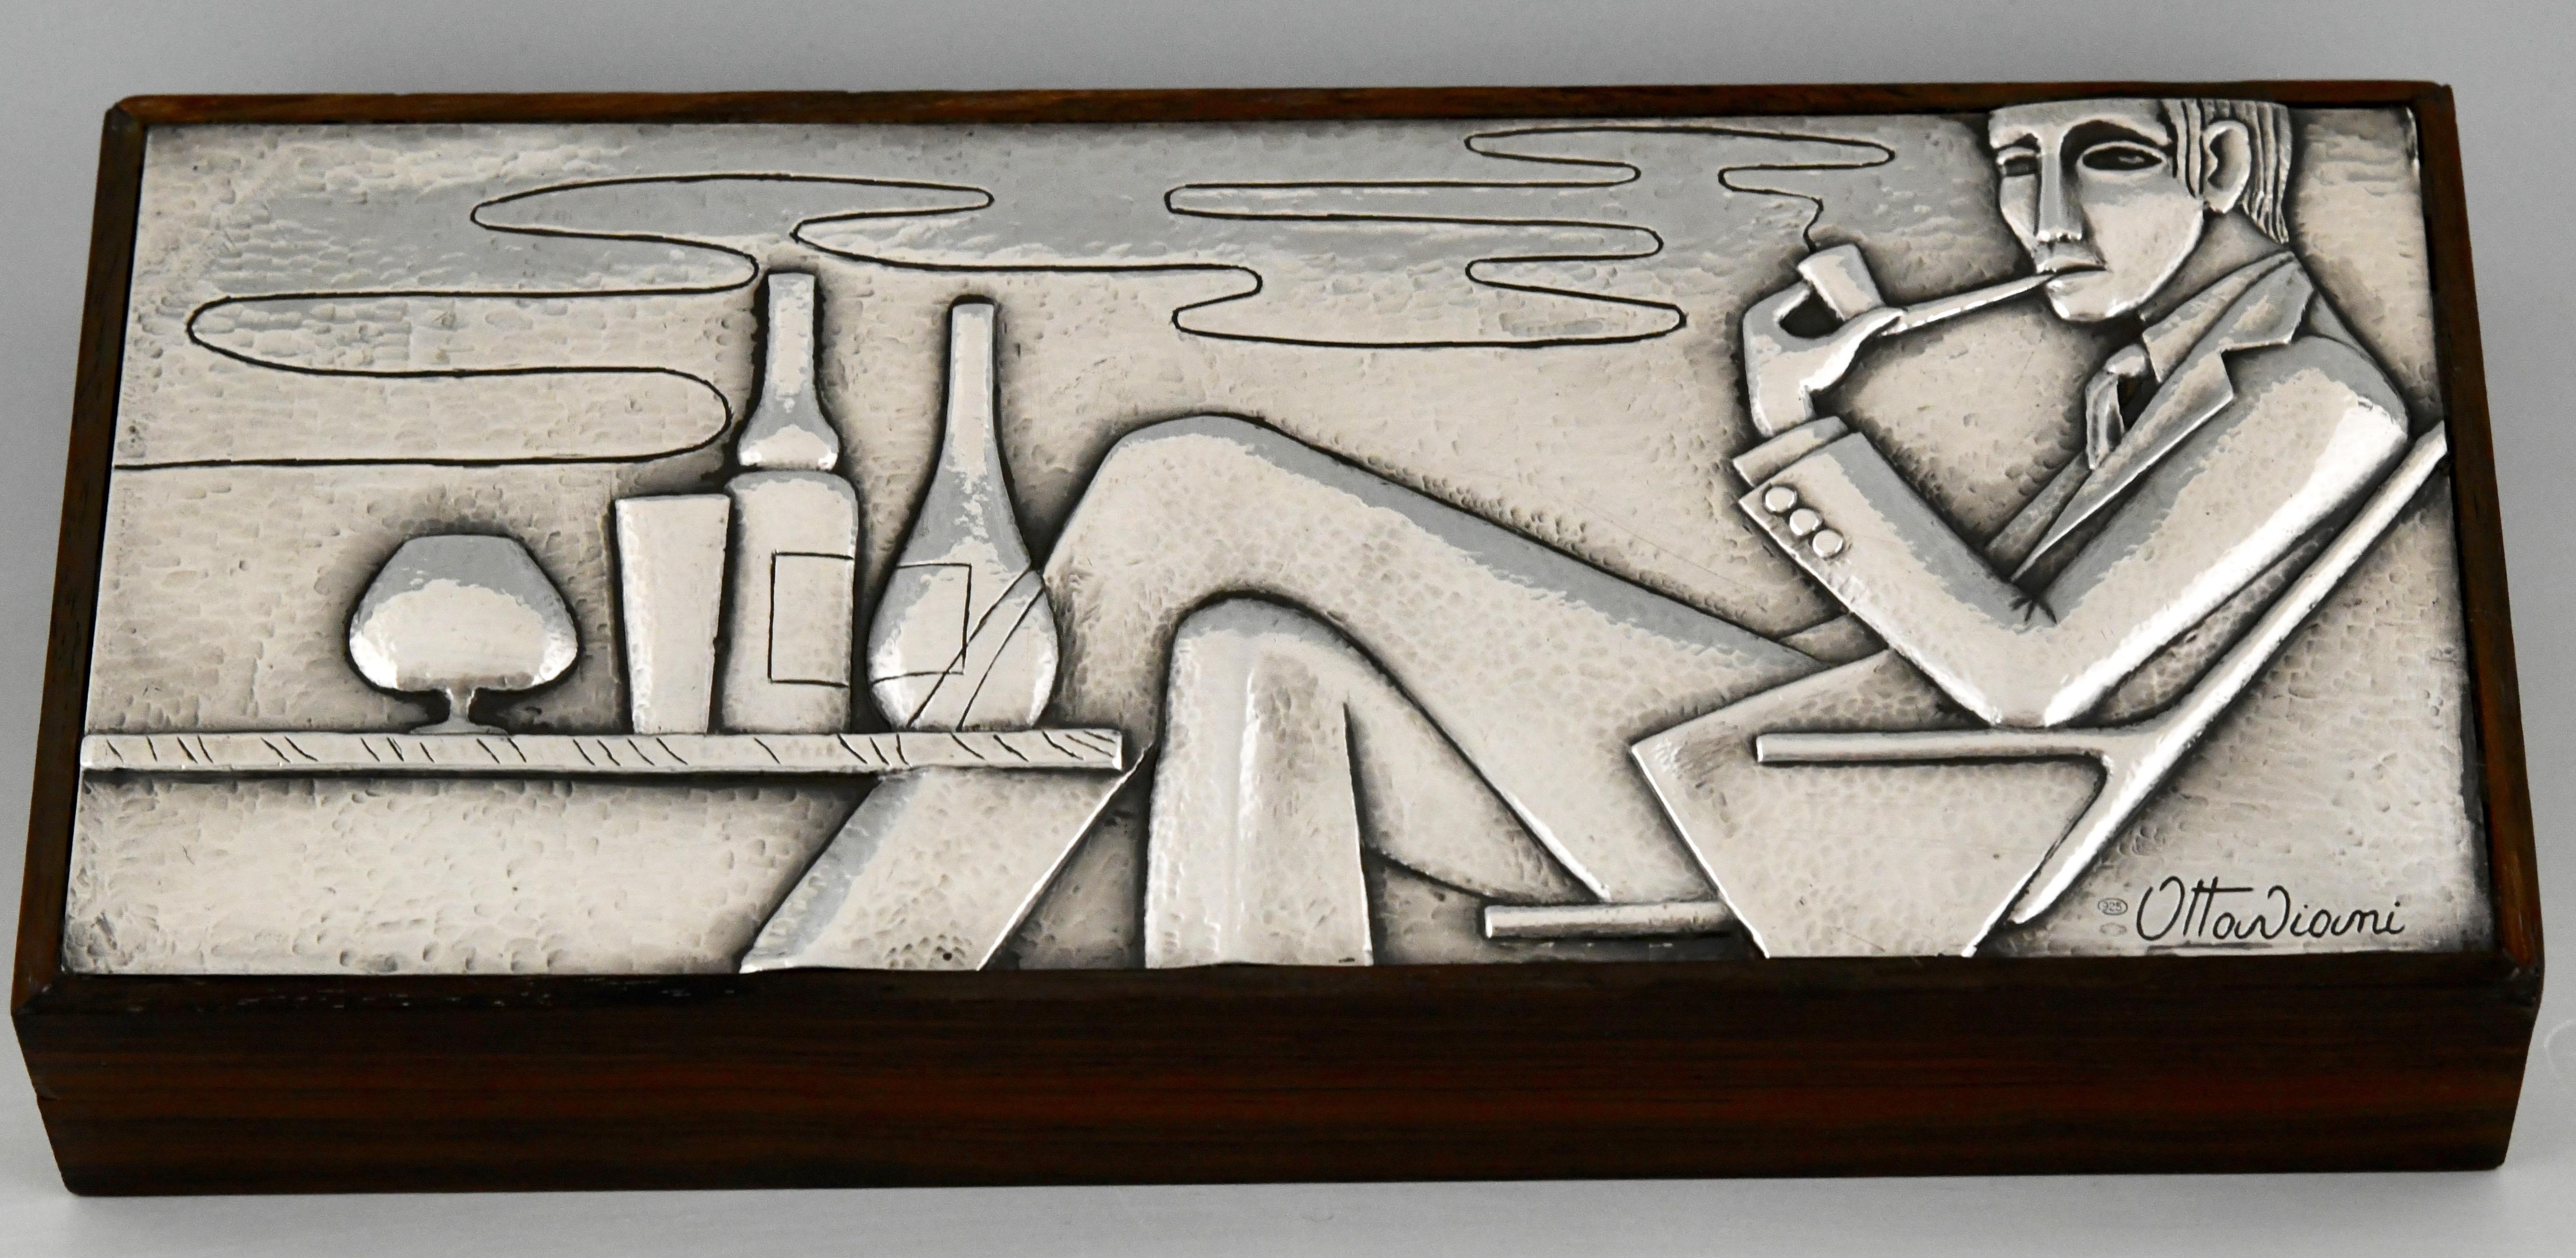 Hammered Mid Century Sterling Silver Cigarette Box with Man Smoking a Pipe Ottaviani 1960